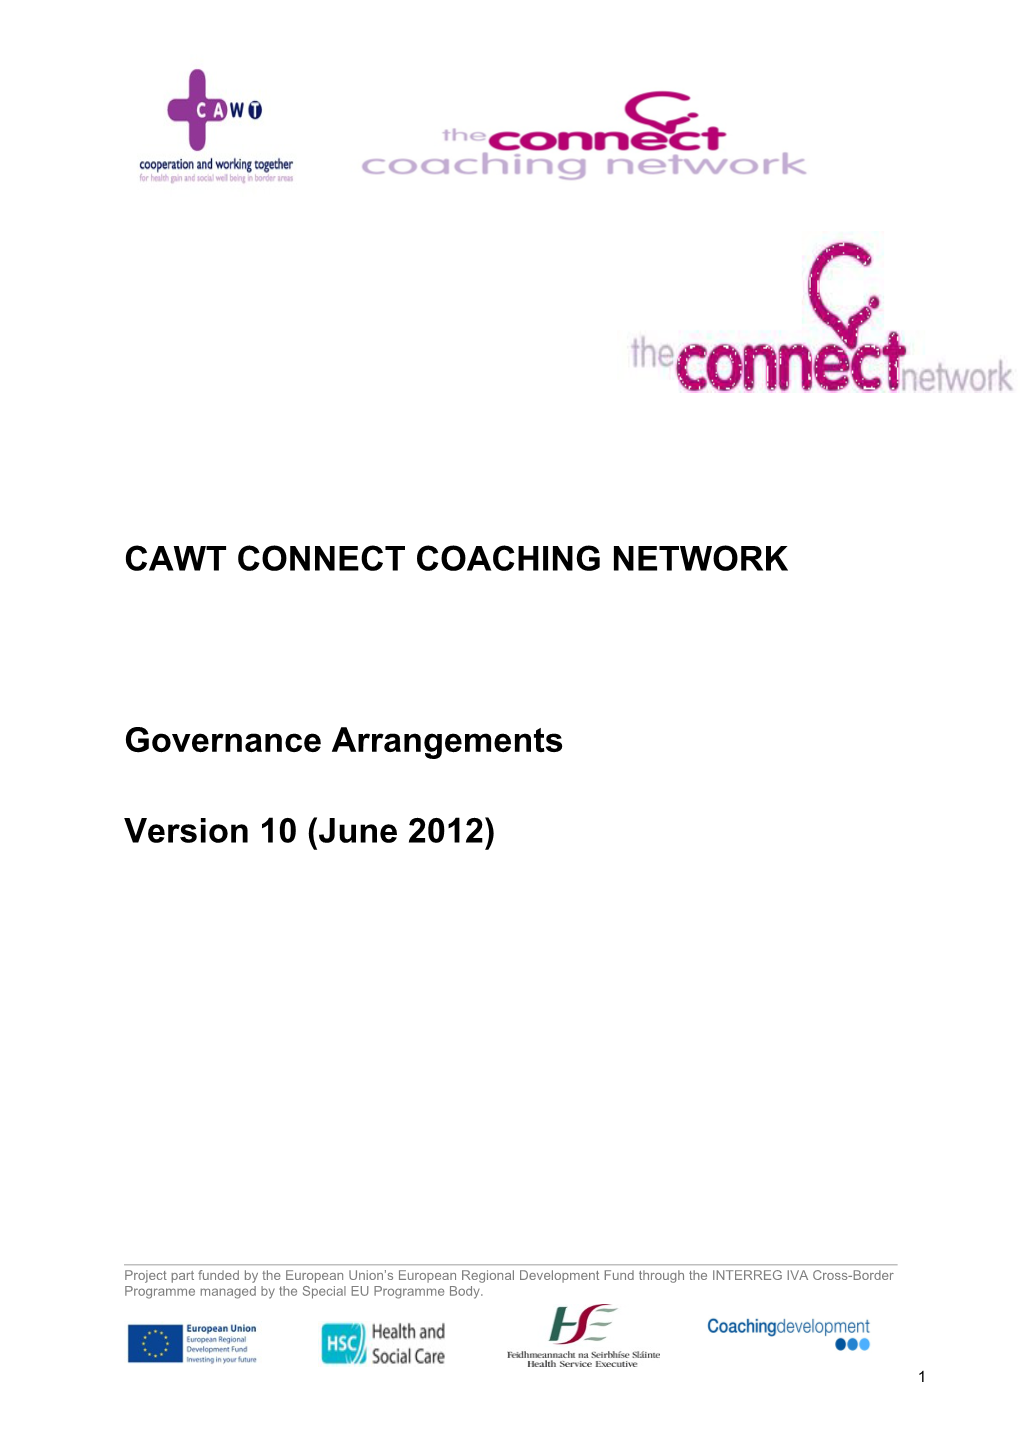 Cawt Connect Coaching Network